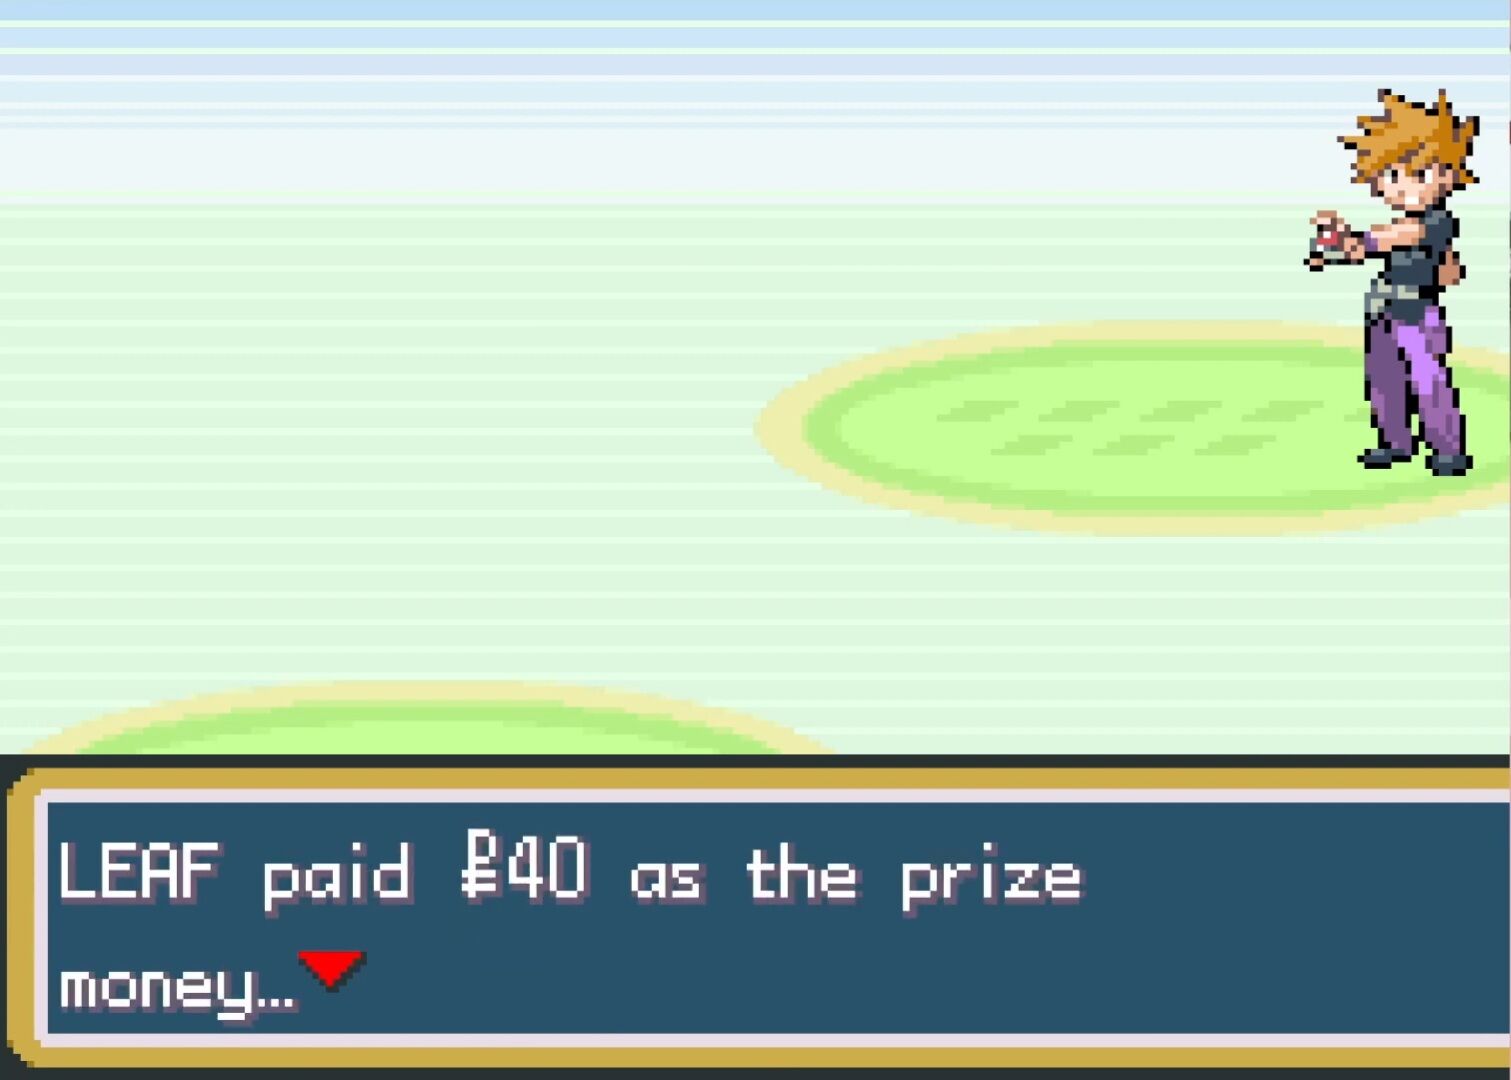 How to Get a Lot of Money in Pokémon FireRed and LeafGreen